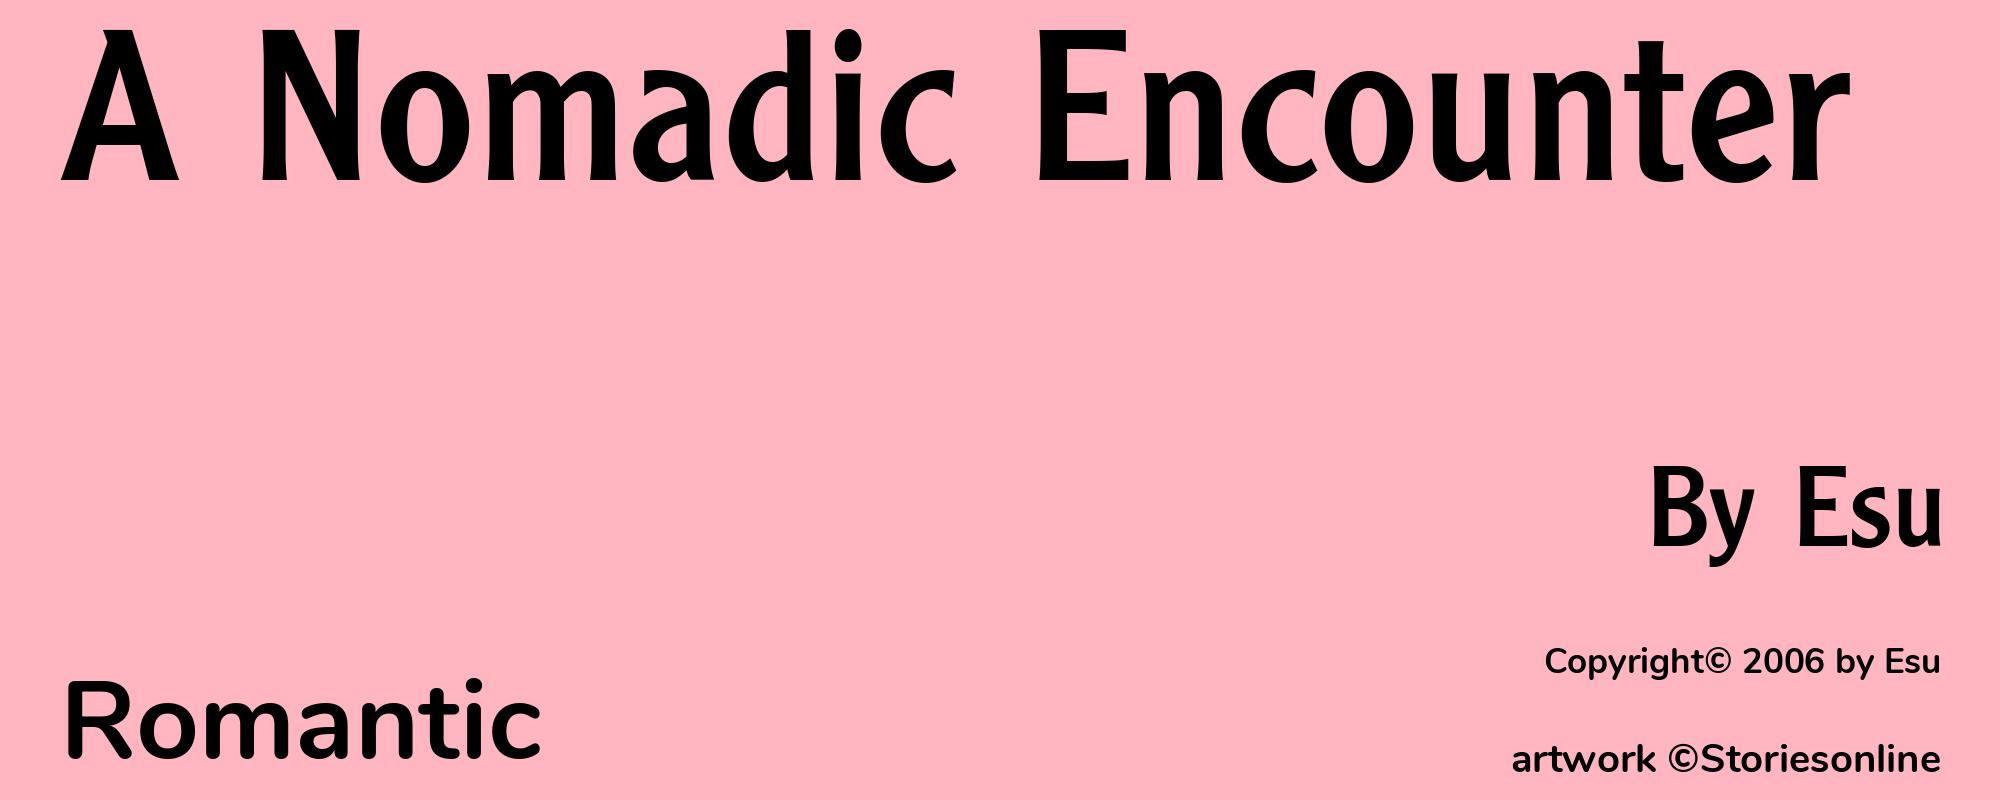 A Nomadic Encounter - Cover